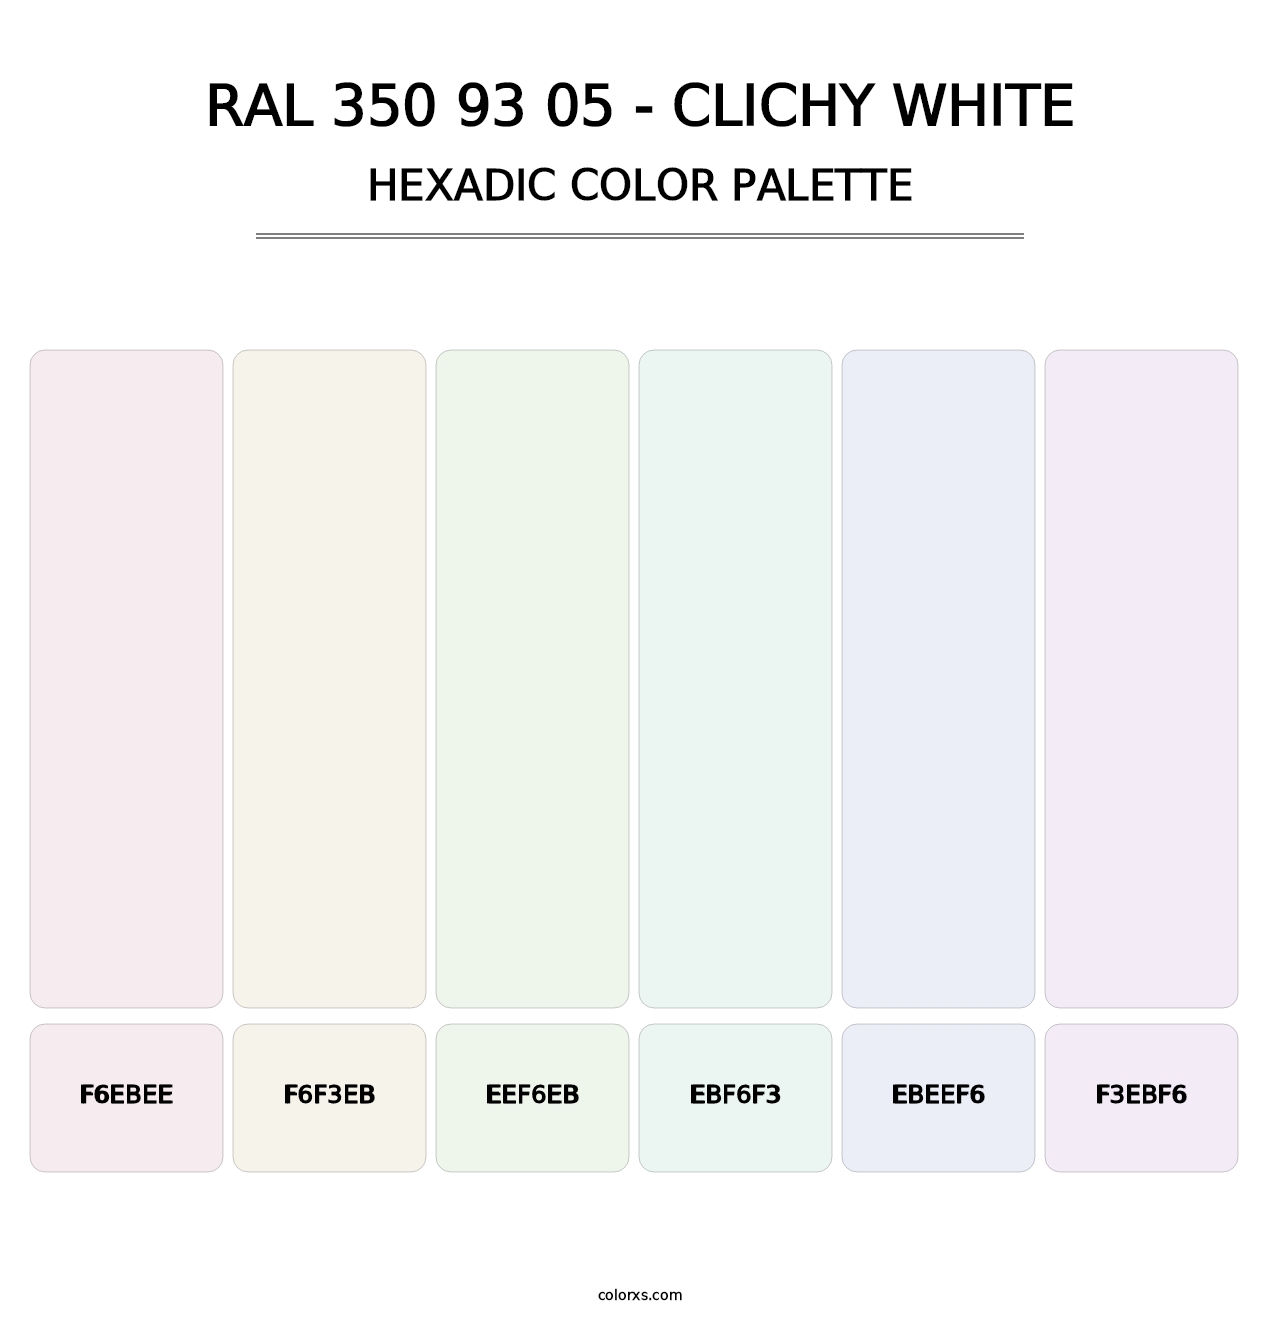 RAL 350 93 05 - Clichy White - Hexadic Color Palette